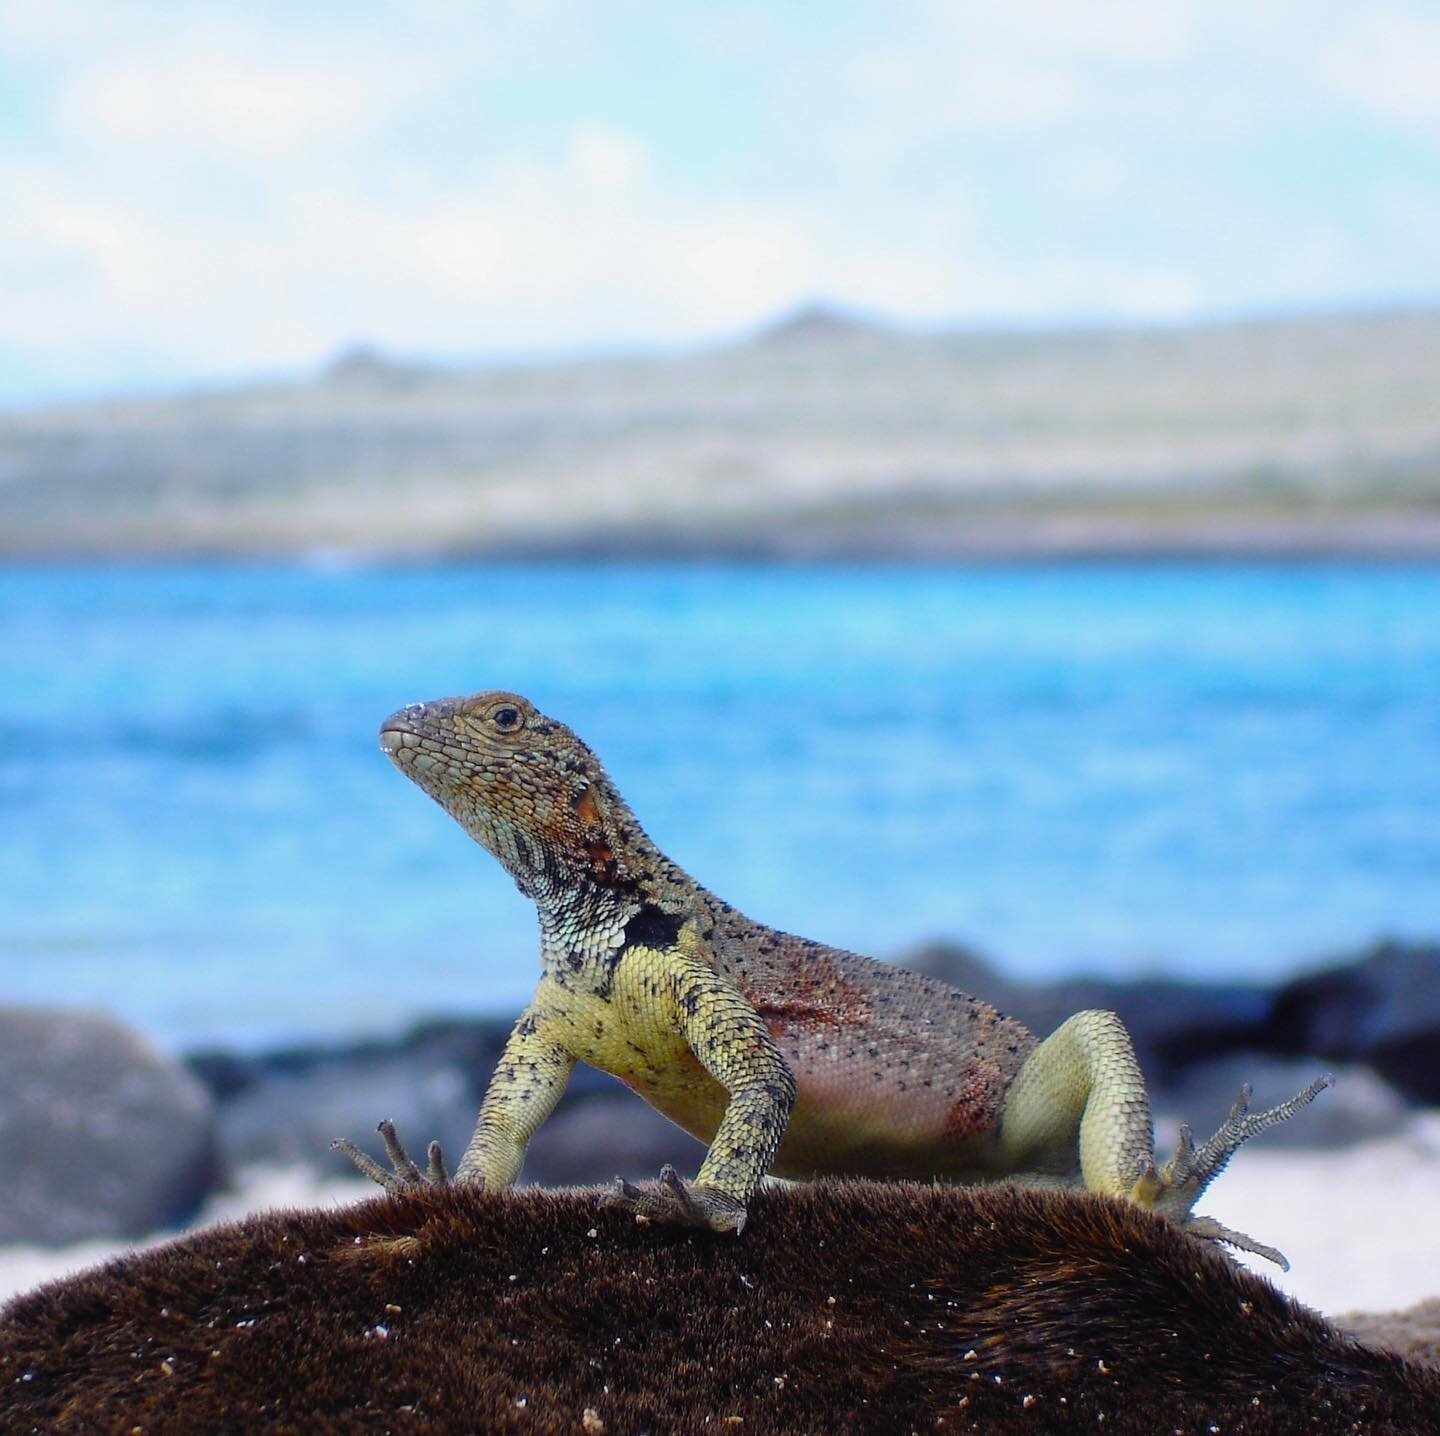 This brightly colored Lava Lizard is known to use color blend into its surroundings. It&rsquo;s just one of the unique creatures guests will observe while visiting the islands. 
#galapagos #wildlife #wildlifephotography #integritygalapagos #luxurycru